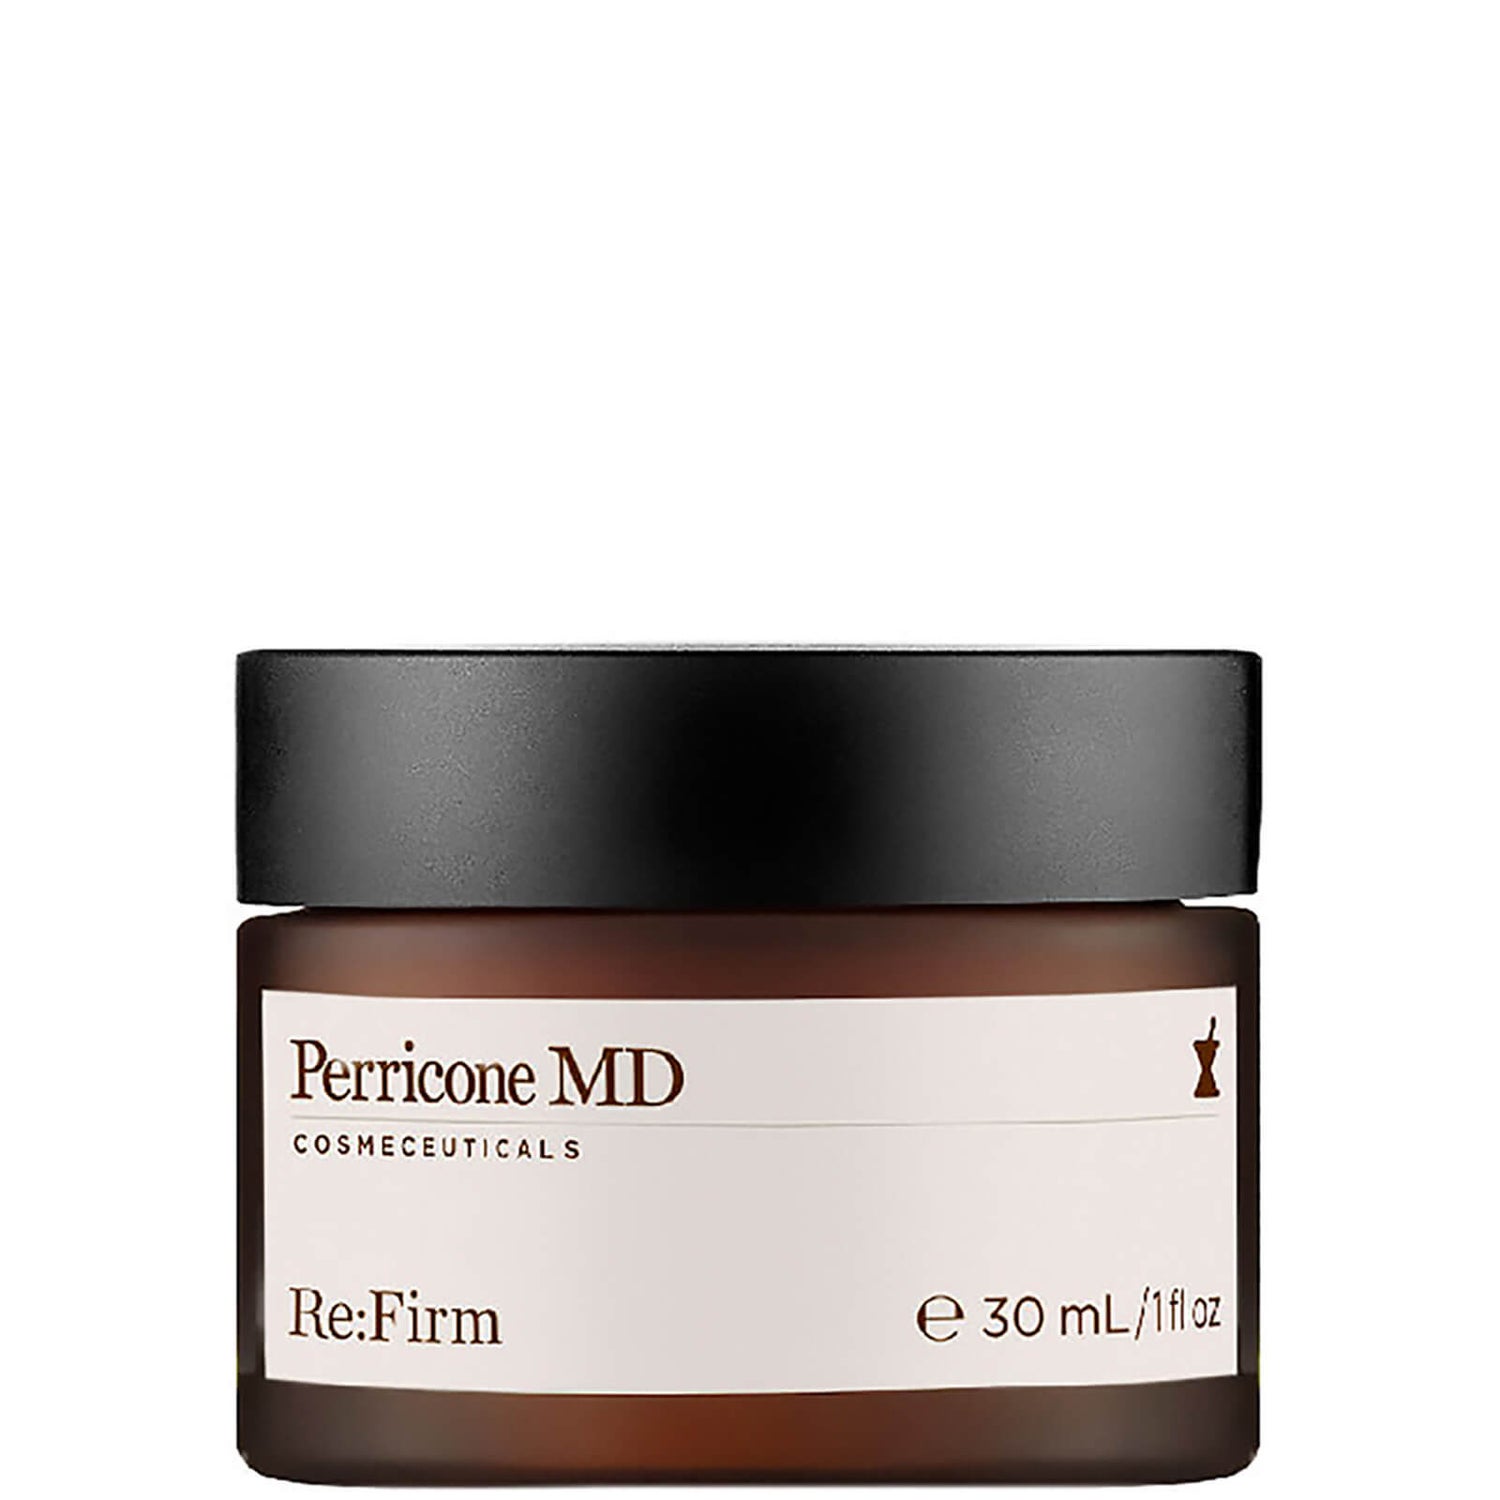 Traitement lissuer d epeau Re: Firm Perricone MD (30 ml)